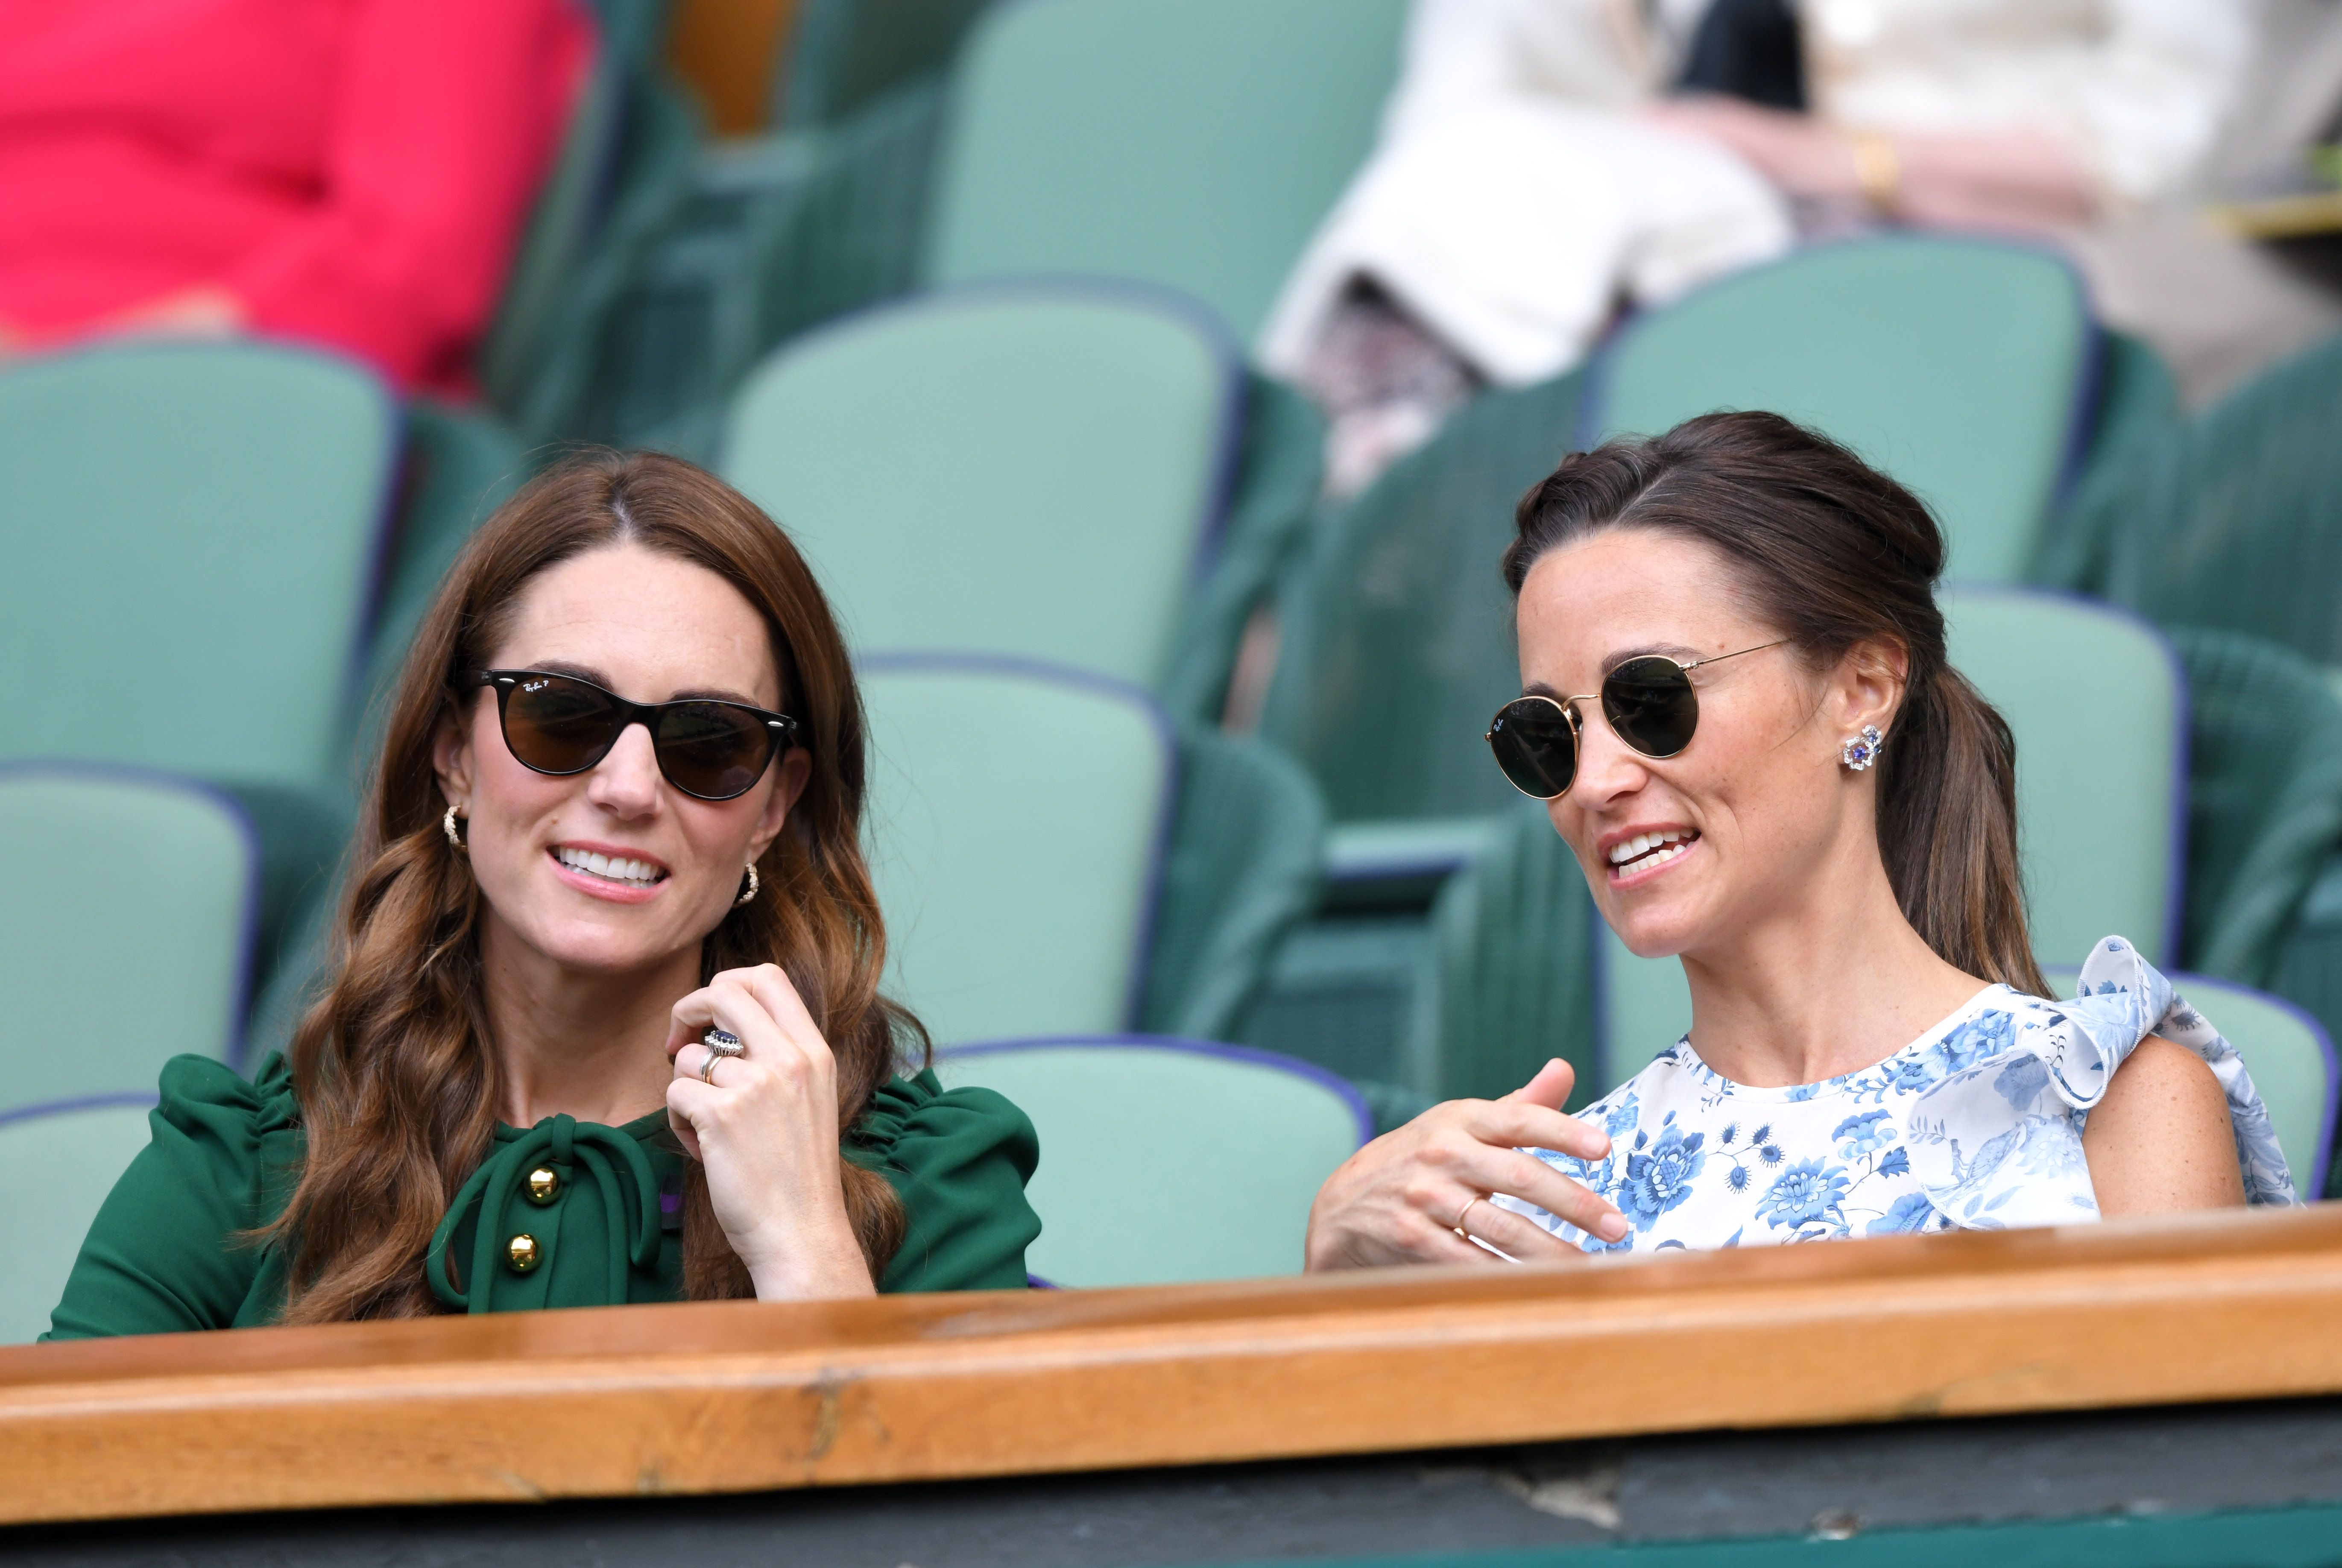 Kate Middleton and Pippa Middleton in the Royal Box on Centre Court during day twelve of the Wimbledon Tennis Championships at All England Lawn Tennis and Croquet Club on July 13, 2019 | Photo: Getty Images